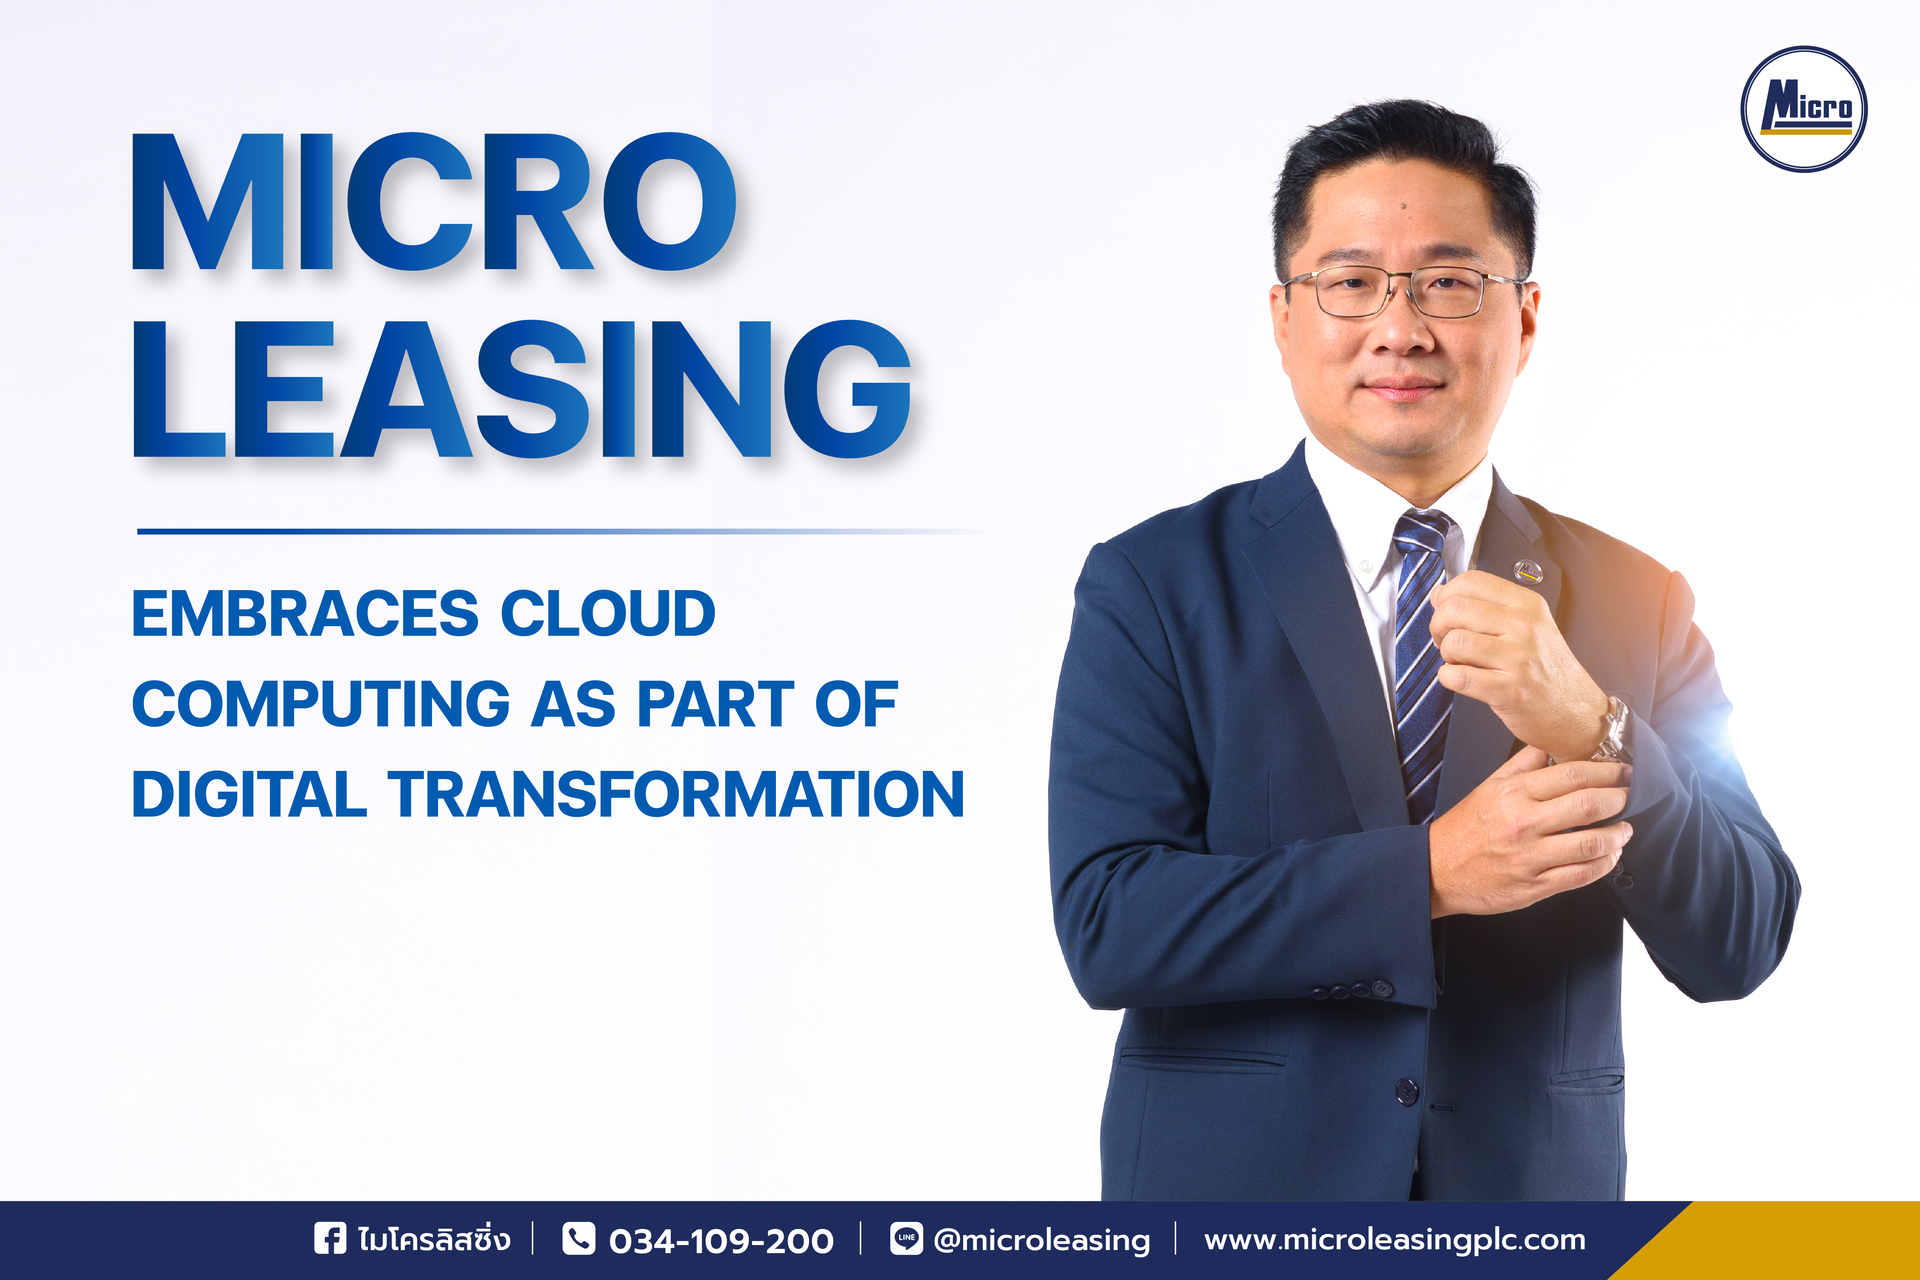 Micro Leasing embraces cloud computing as part of digital transformation